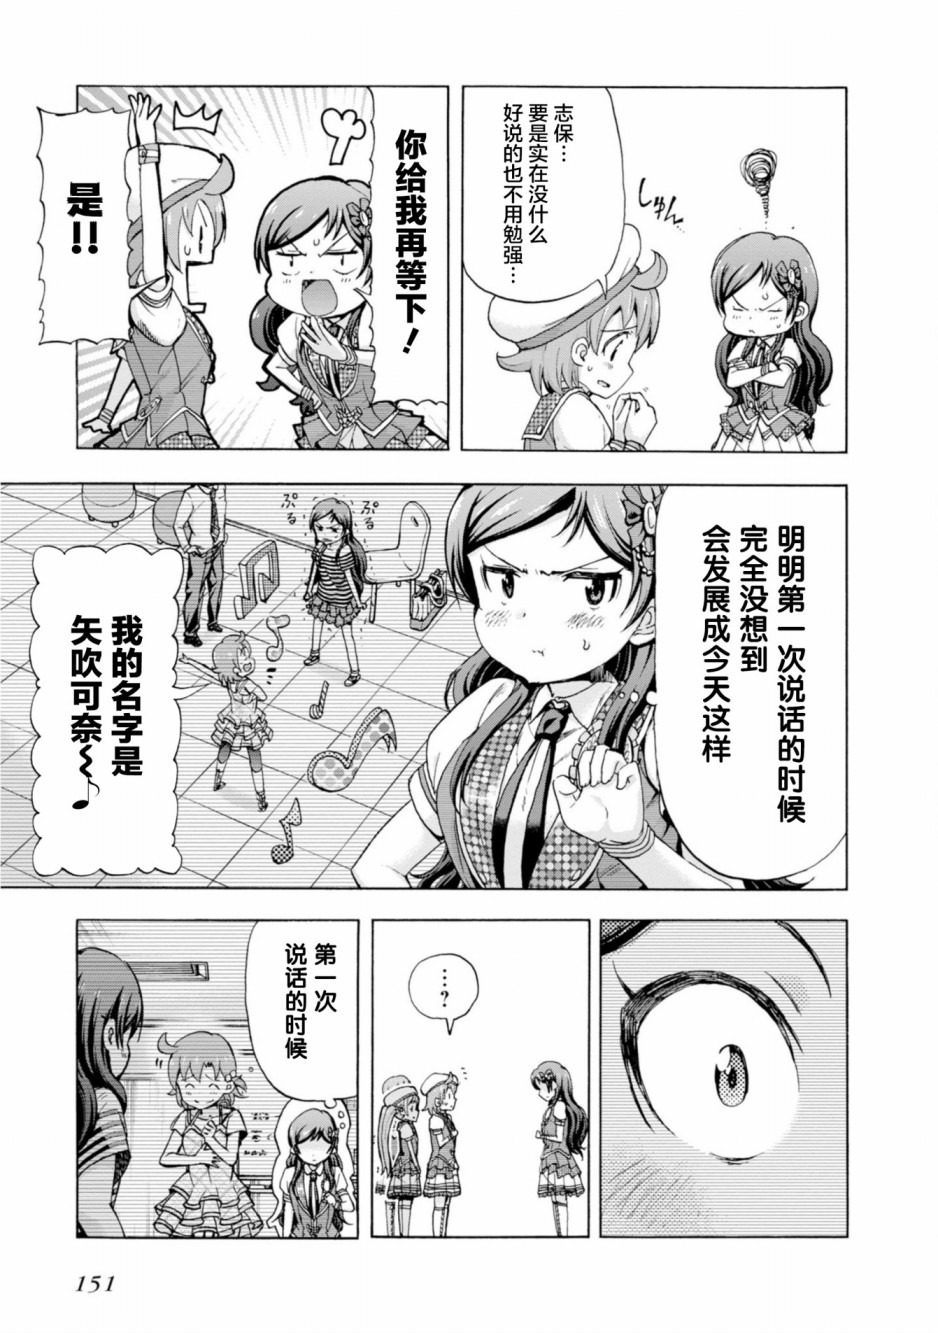 THE IDOLM@STER MILLION LIVE! Blooming Clover - 18話(1/2) - 5